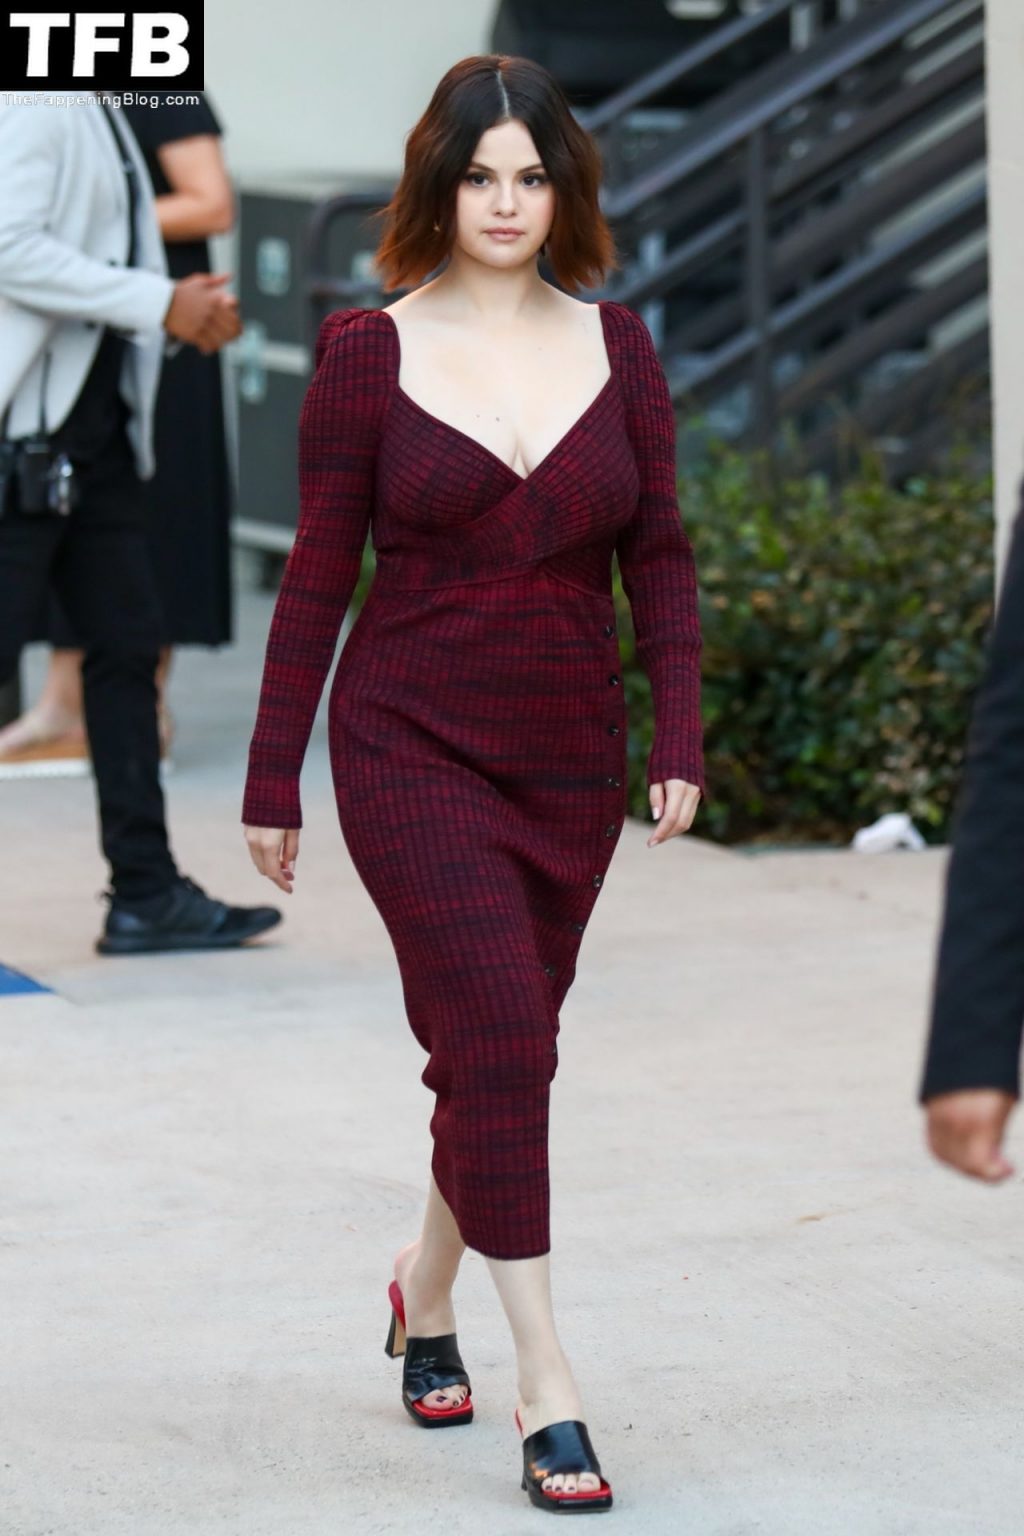 Busty Selena Gomez Leaves a Press Tour Stop For “Only Murders in the Building” (98 Photos)